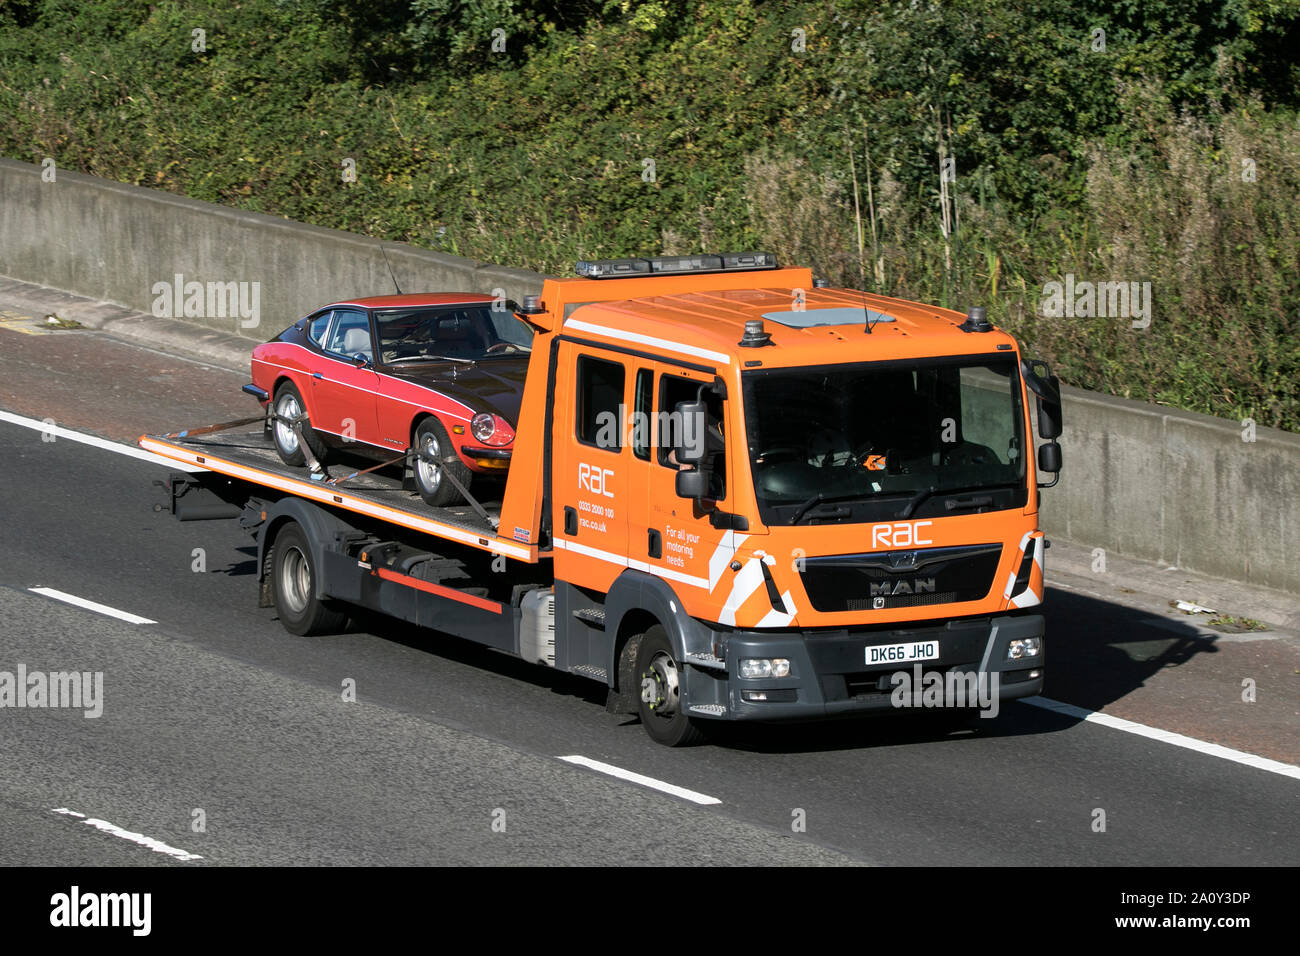 A MAN RAC flatbed vehicle breakdown recovery truck traveling northbound on the M6 motorway near Garstang in Lancashire, UK Stock Photo